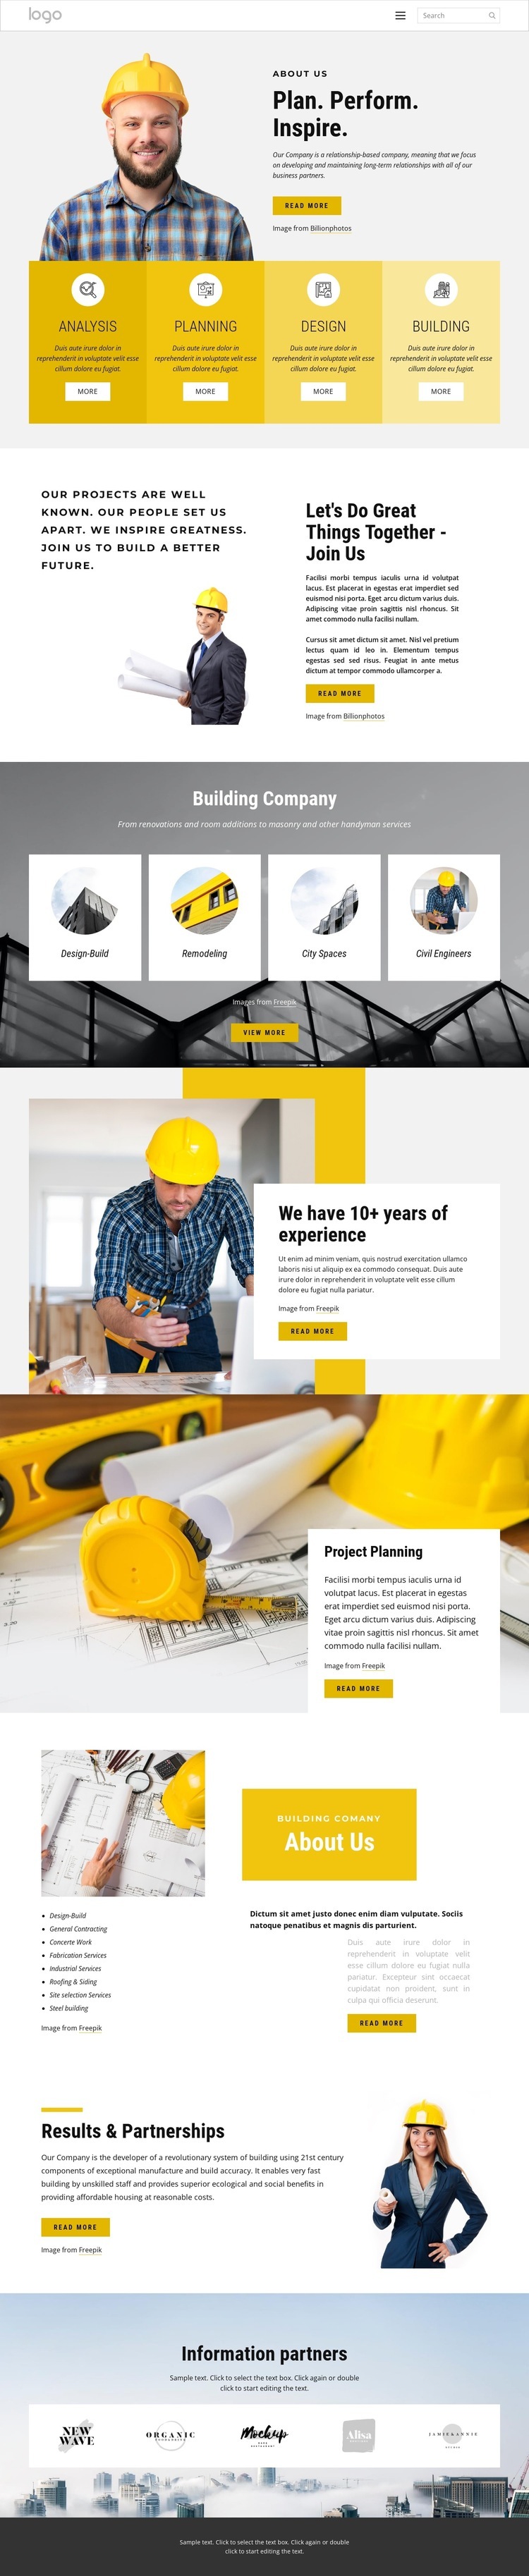 Building projects Web Page Design